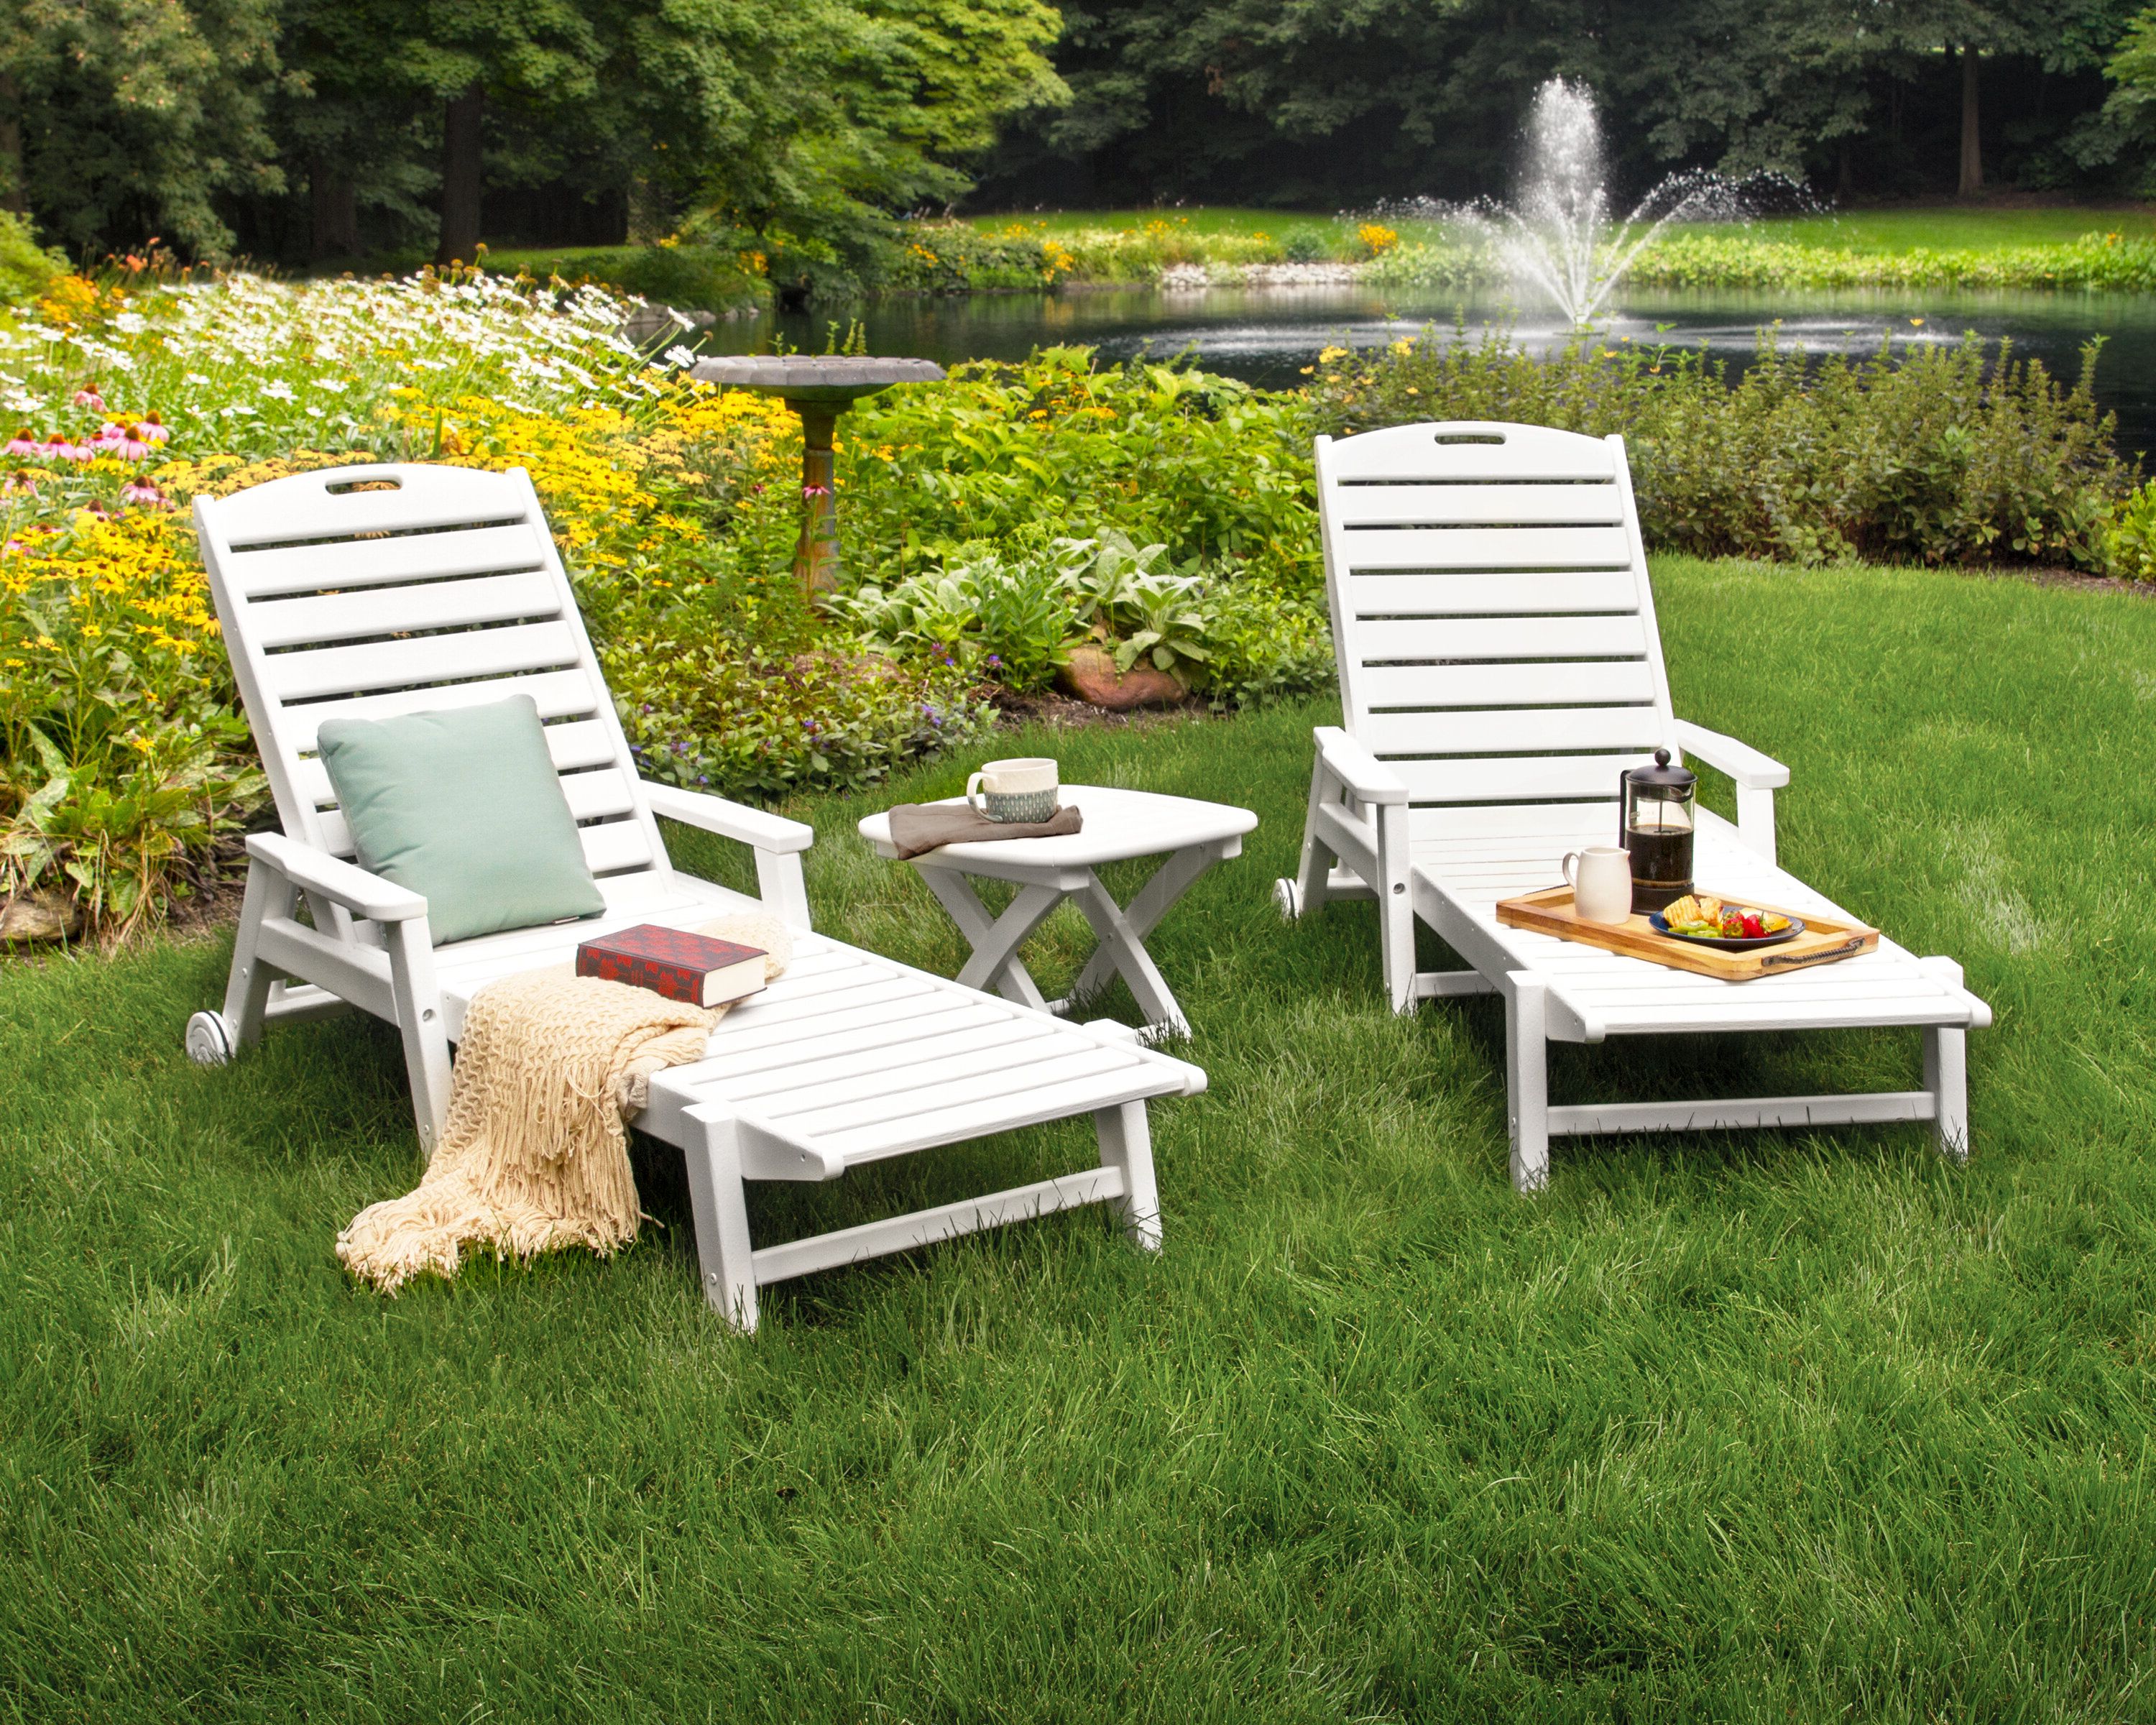 Preferred Nautical 3 Piece Outdoor Chaise Lounge Sets With Wheels And Table Intended For Avid 3 Piece Chaise Lounge Set (View 7 of 25)